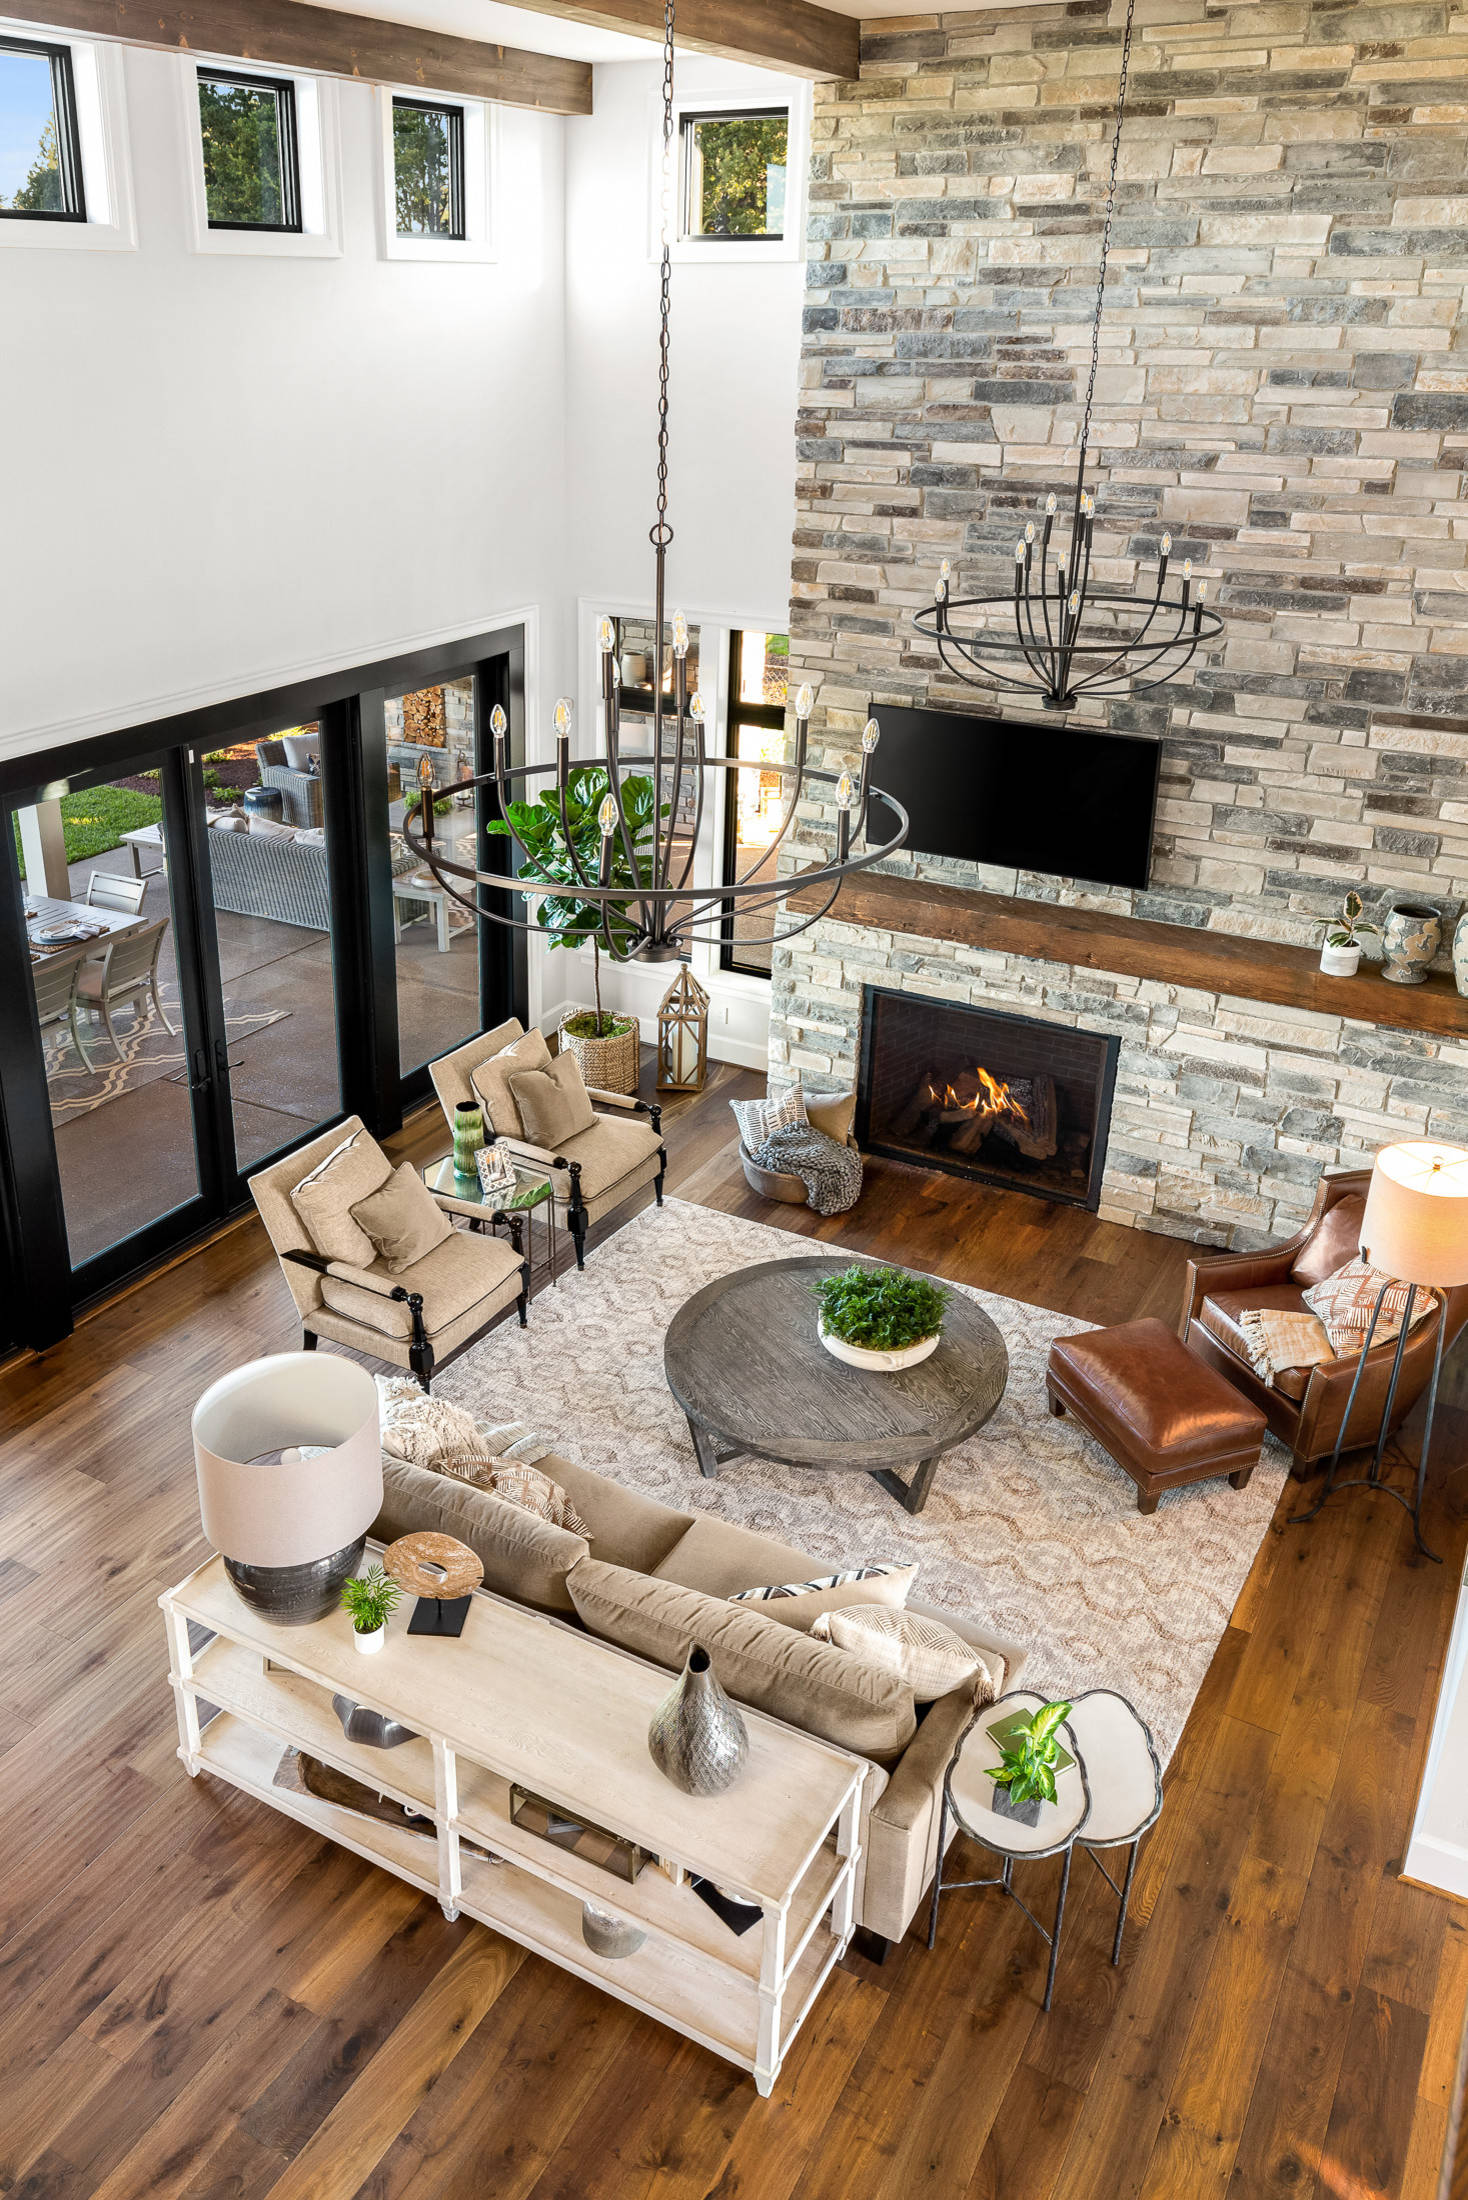 Modern living space with high ceilings and large stone fireplace 